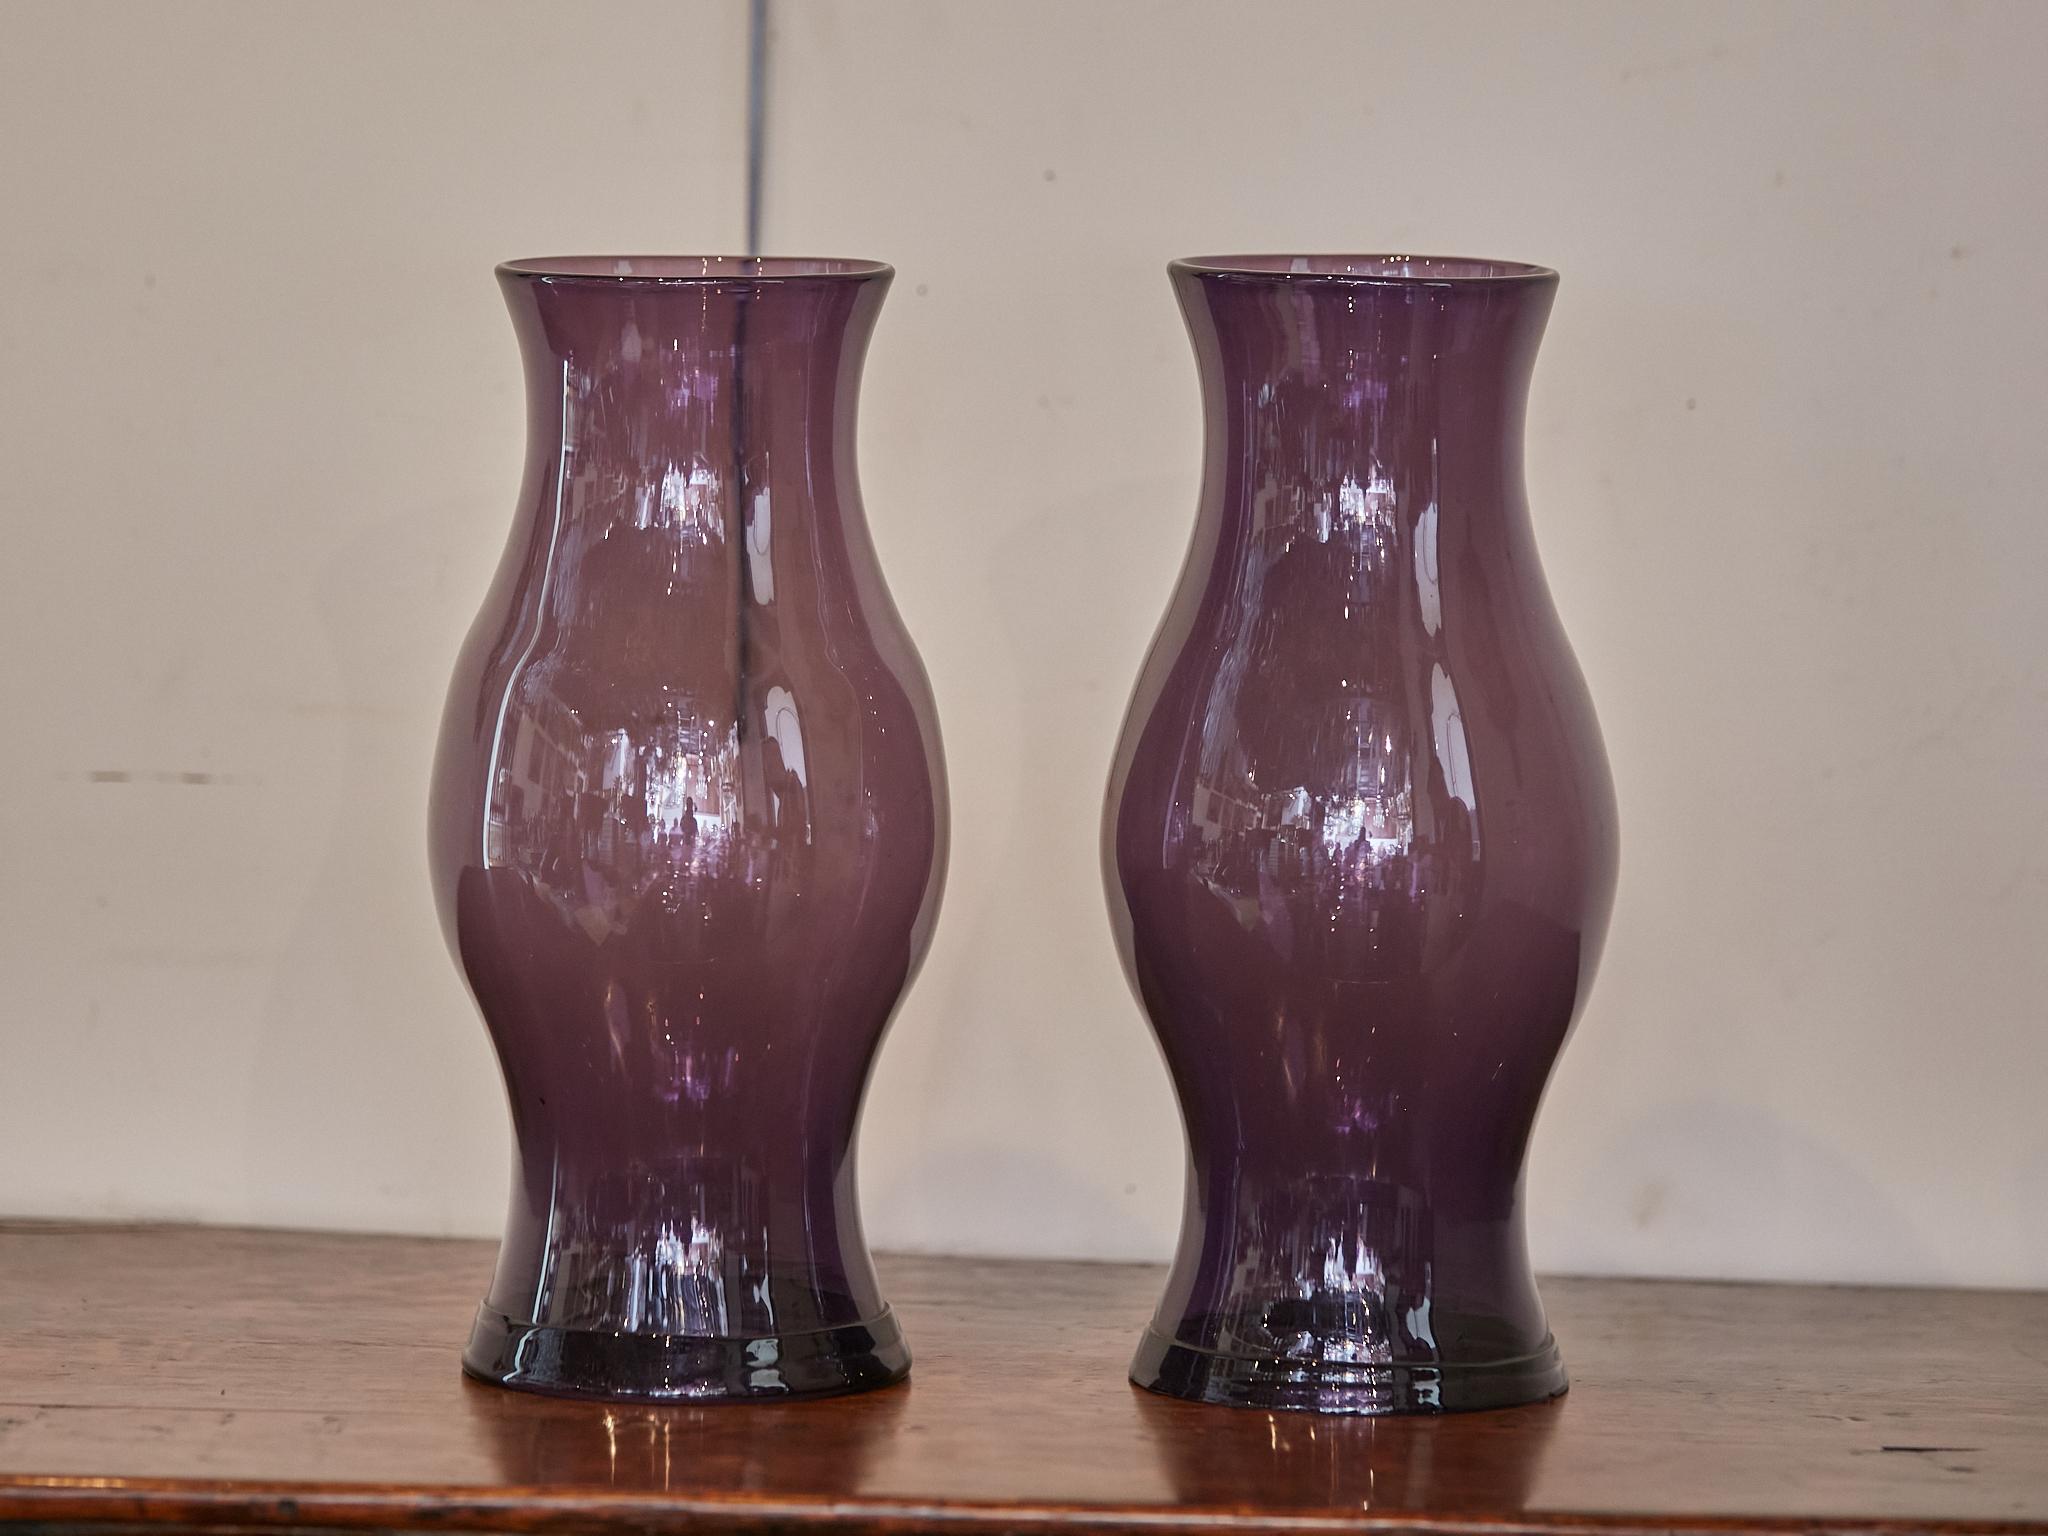 A pair of Midcentury American Amethyst color glass hurricane lamp shades. This pair of Midcentury American hurricane lamp shades, crafted in a radiant Amethyst hue, is a statement in both color and form. The deep, regal purple tone of the glass